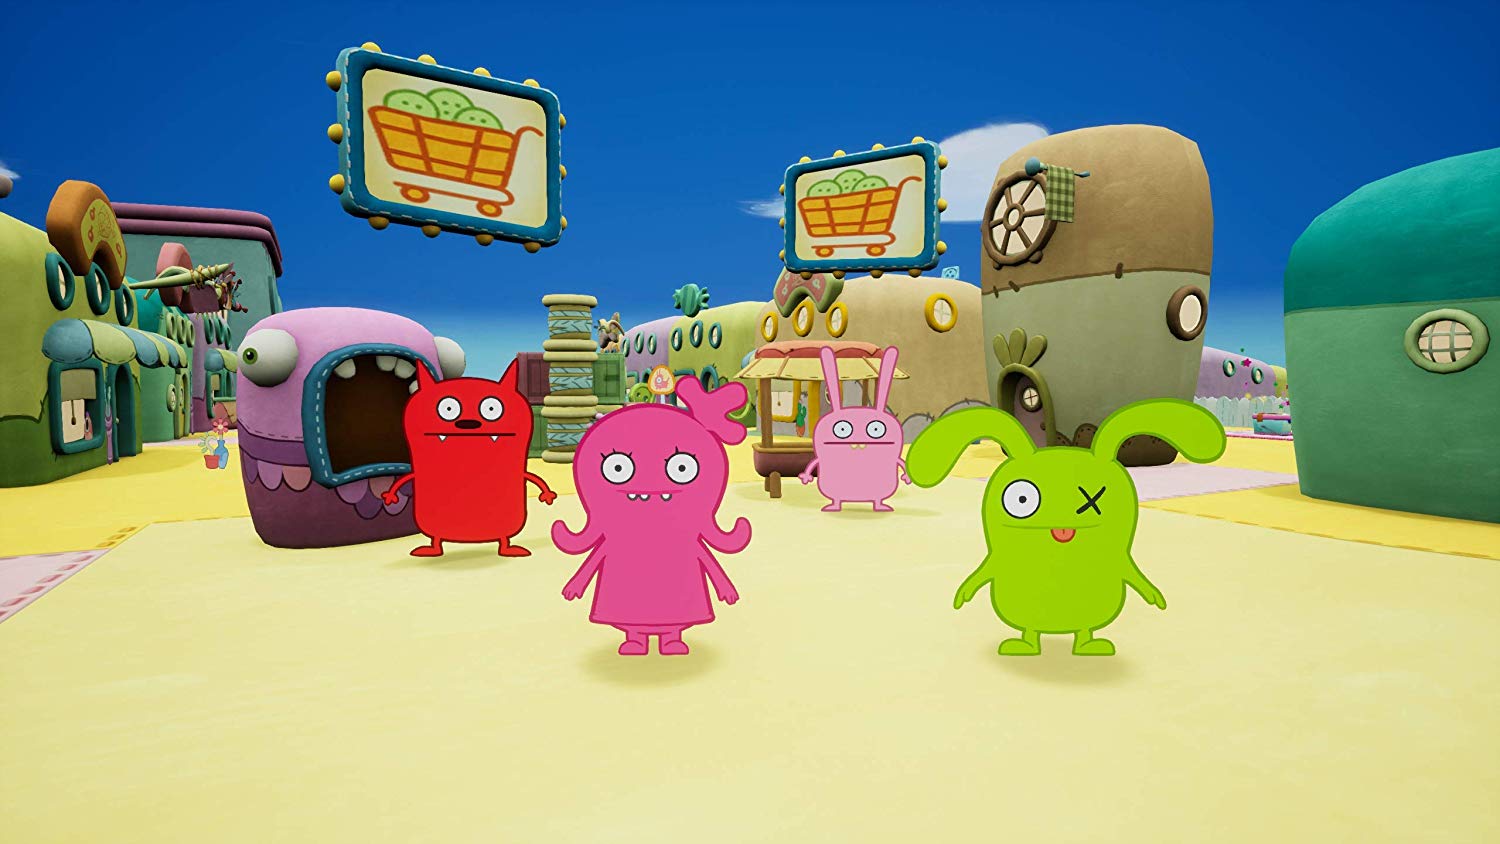 Ugly Dolls: An Imperfect Adventure - Xbox One Video Games Outright Games   